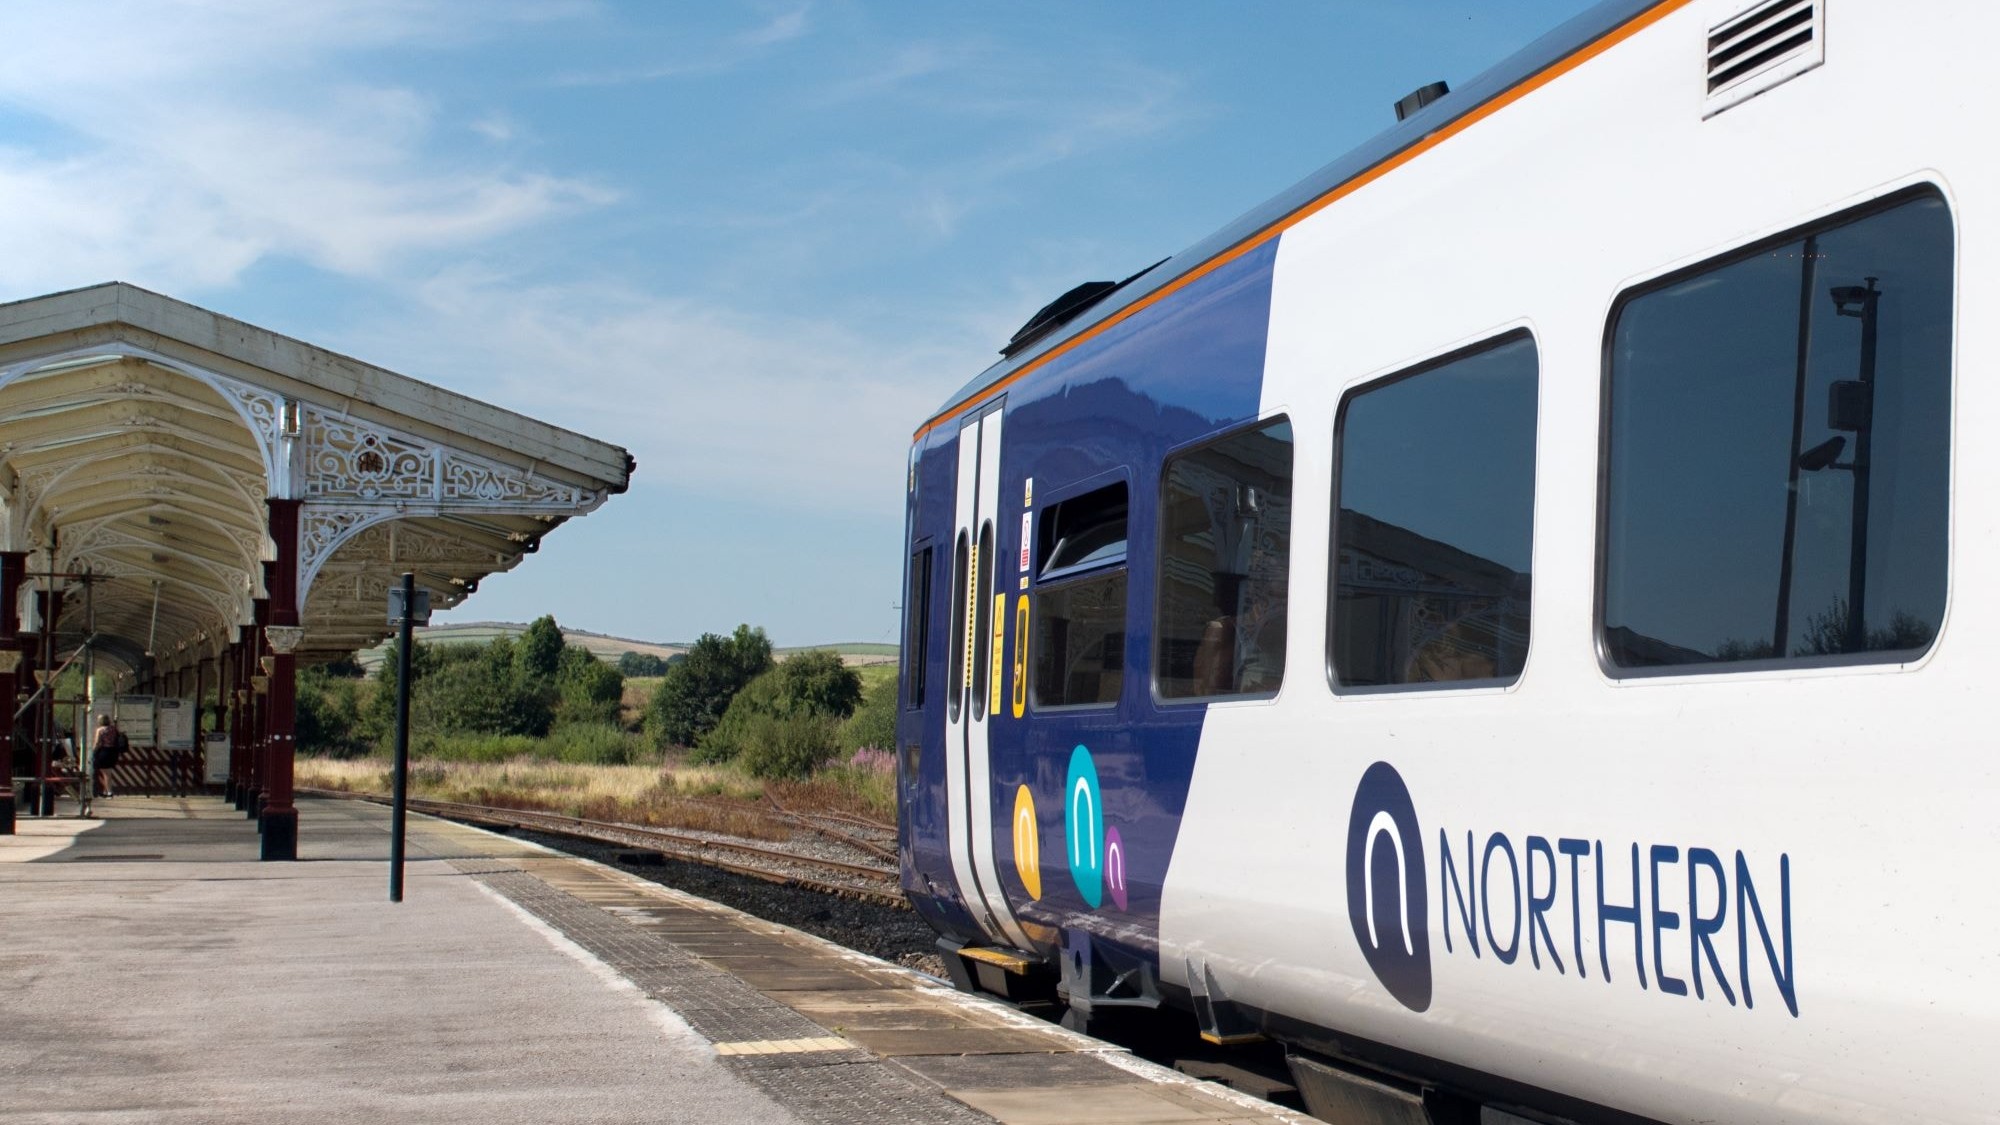 Image shows Northern trains at station